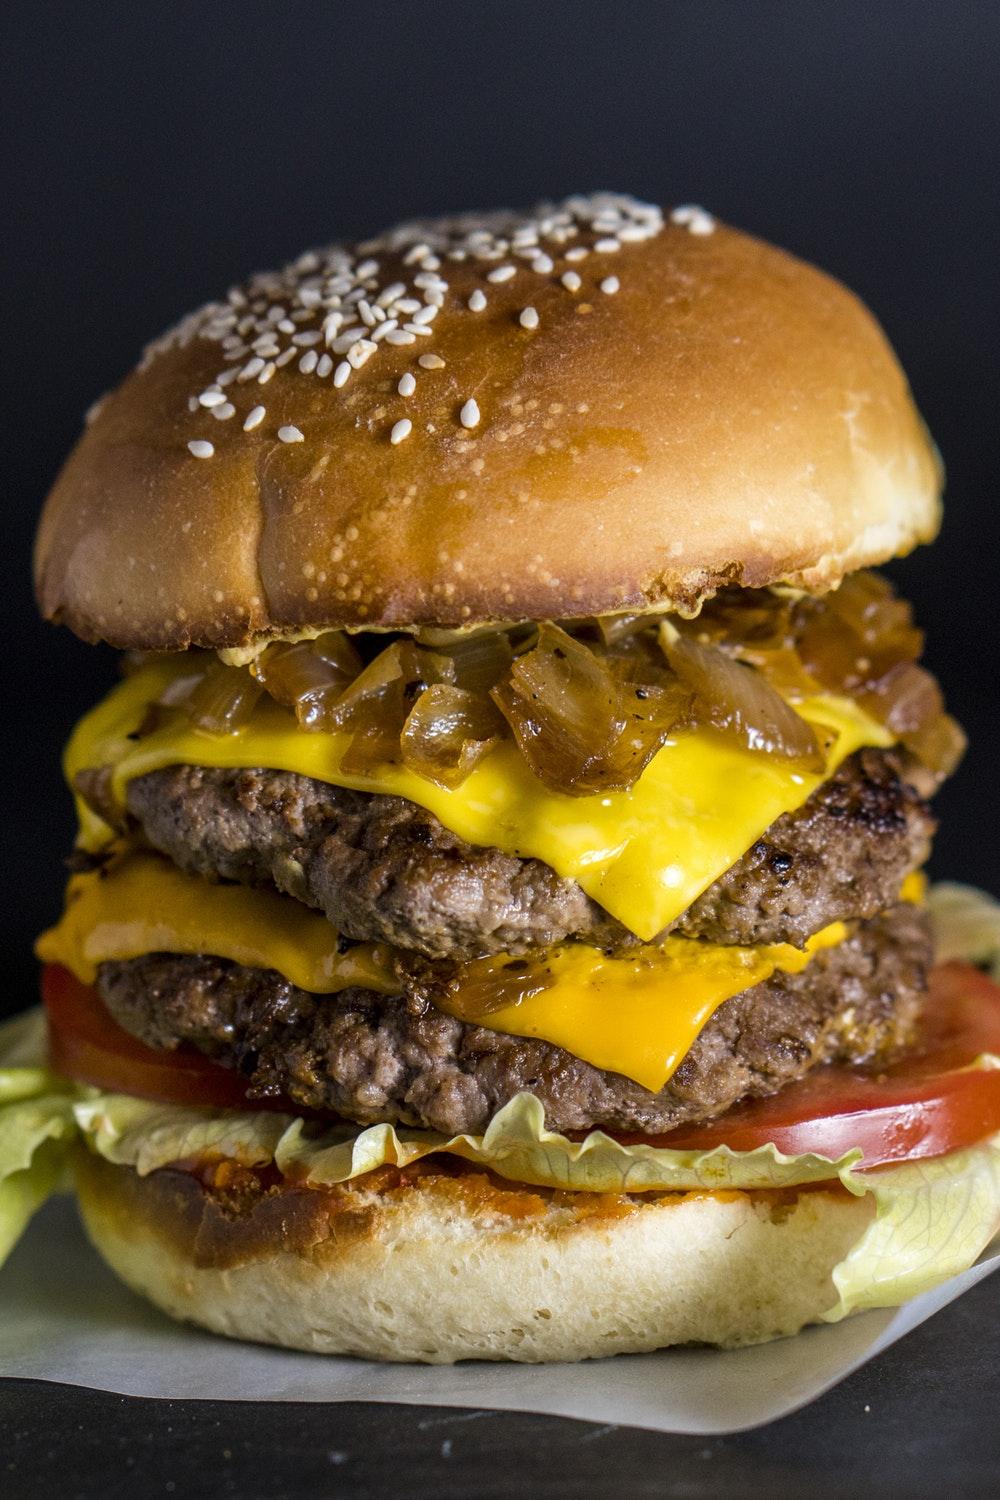 Burger Picture. Download Free Image